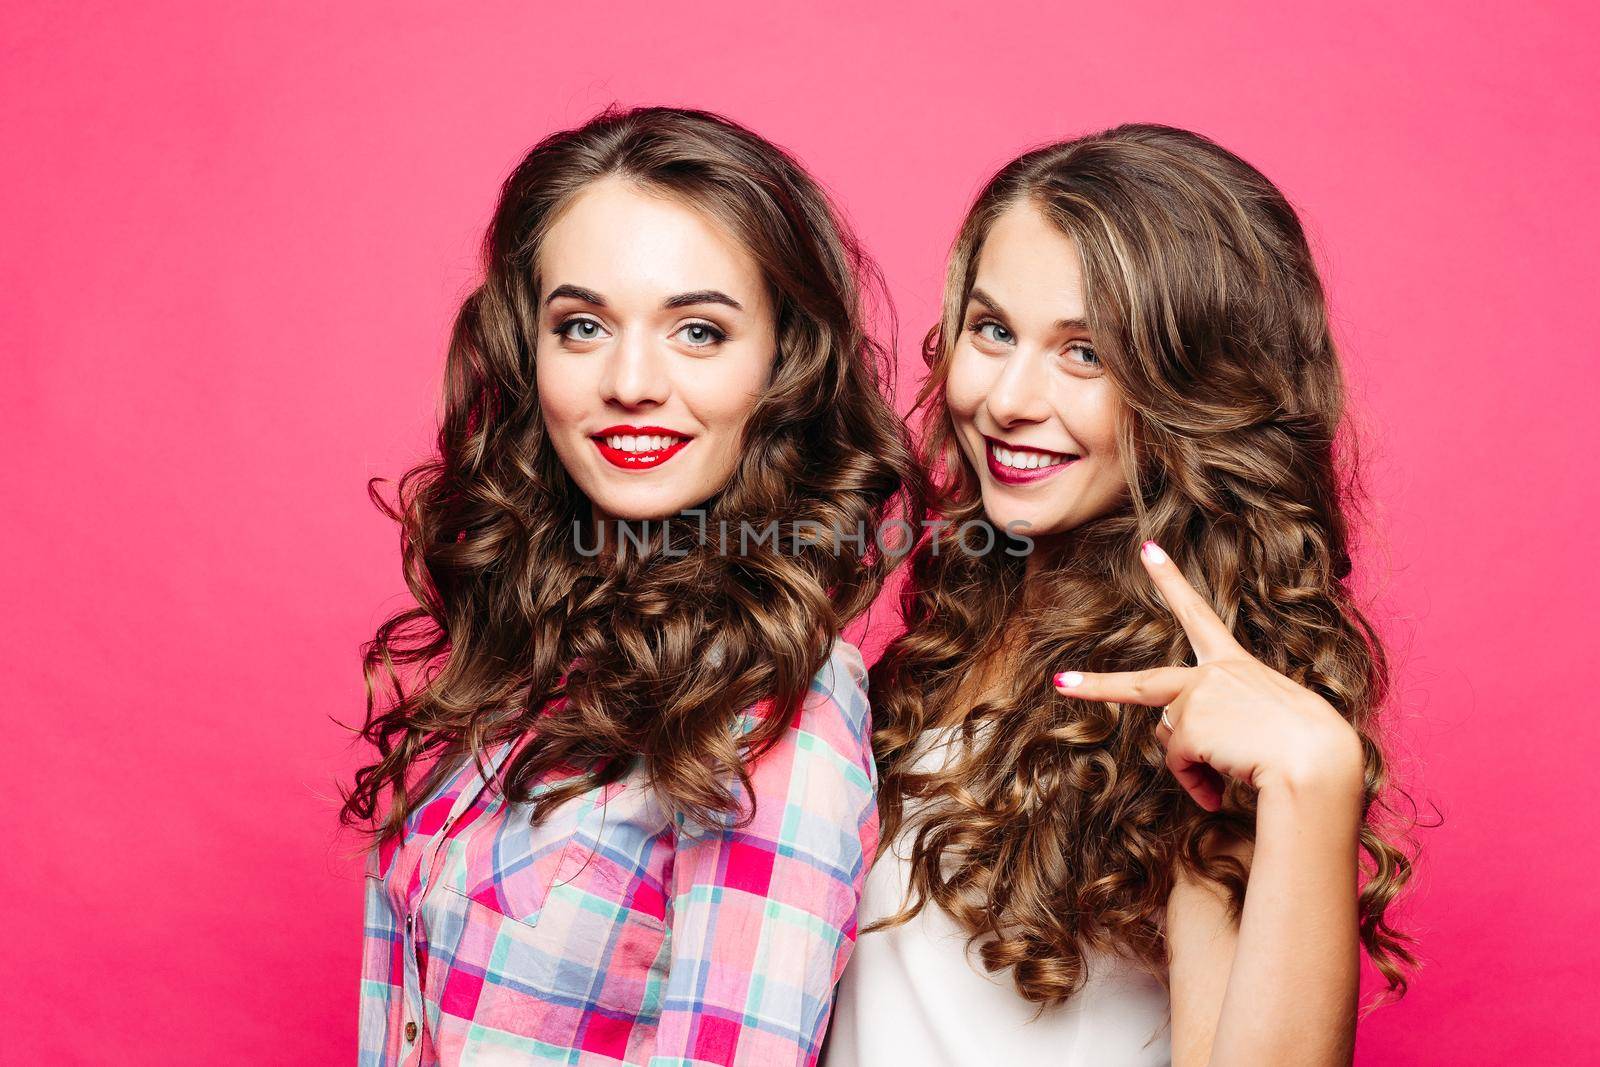 Portrait of stunning beauties with gorgeous wavy hair and red lips smiling at camera and showing peace sign. Isolate on pink background.